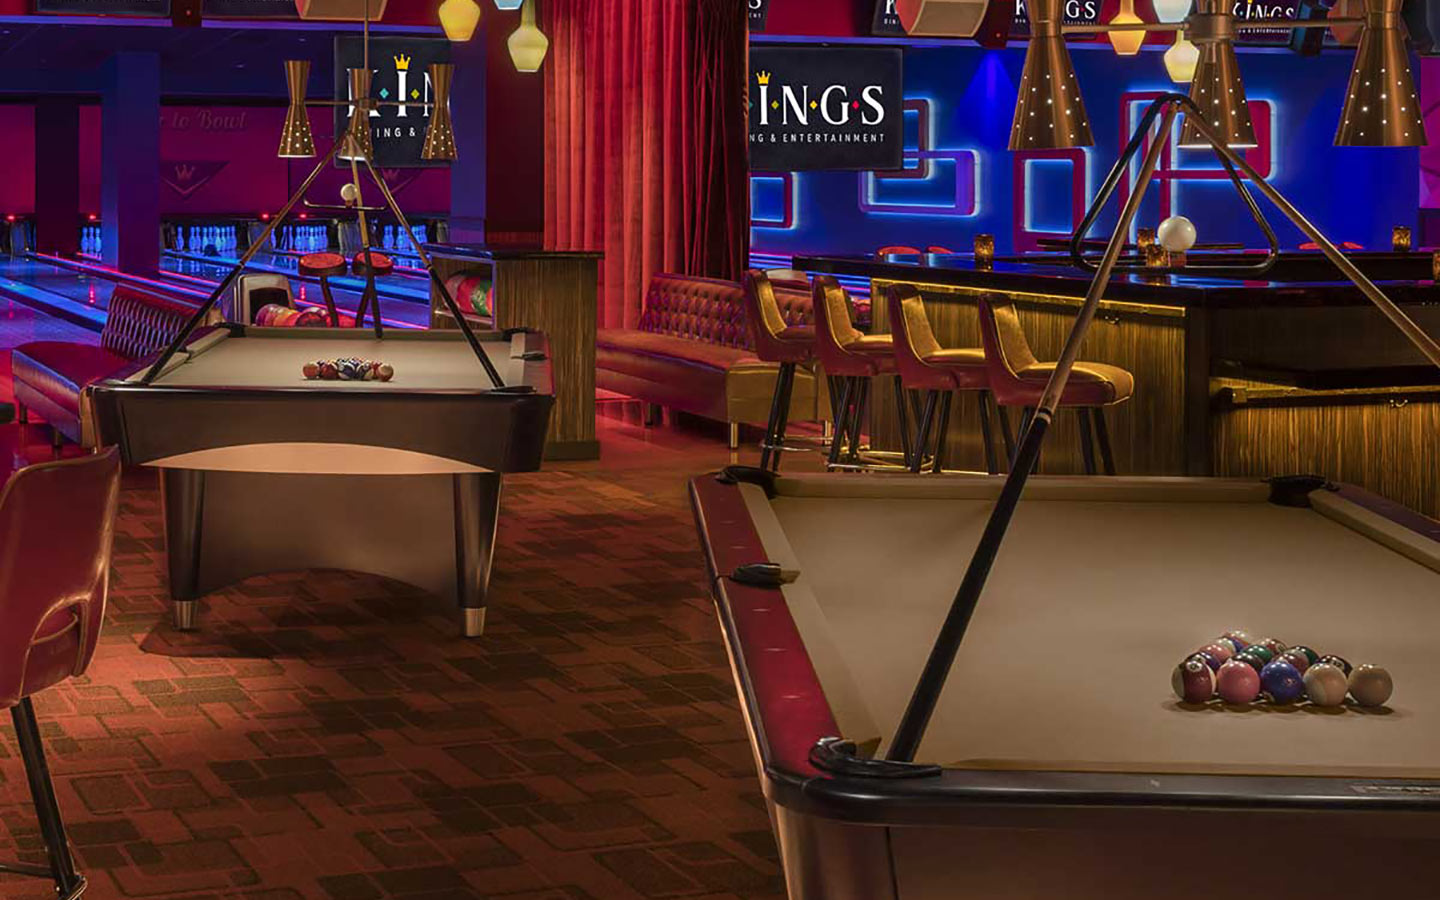 Retro decor and the ultimate gaming experience are at Kings in Doral